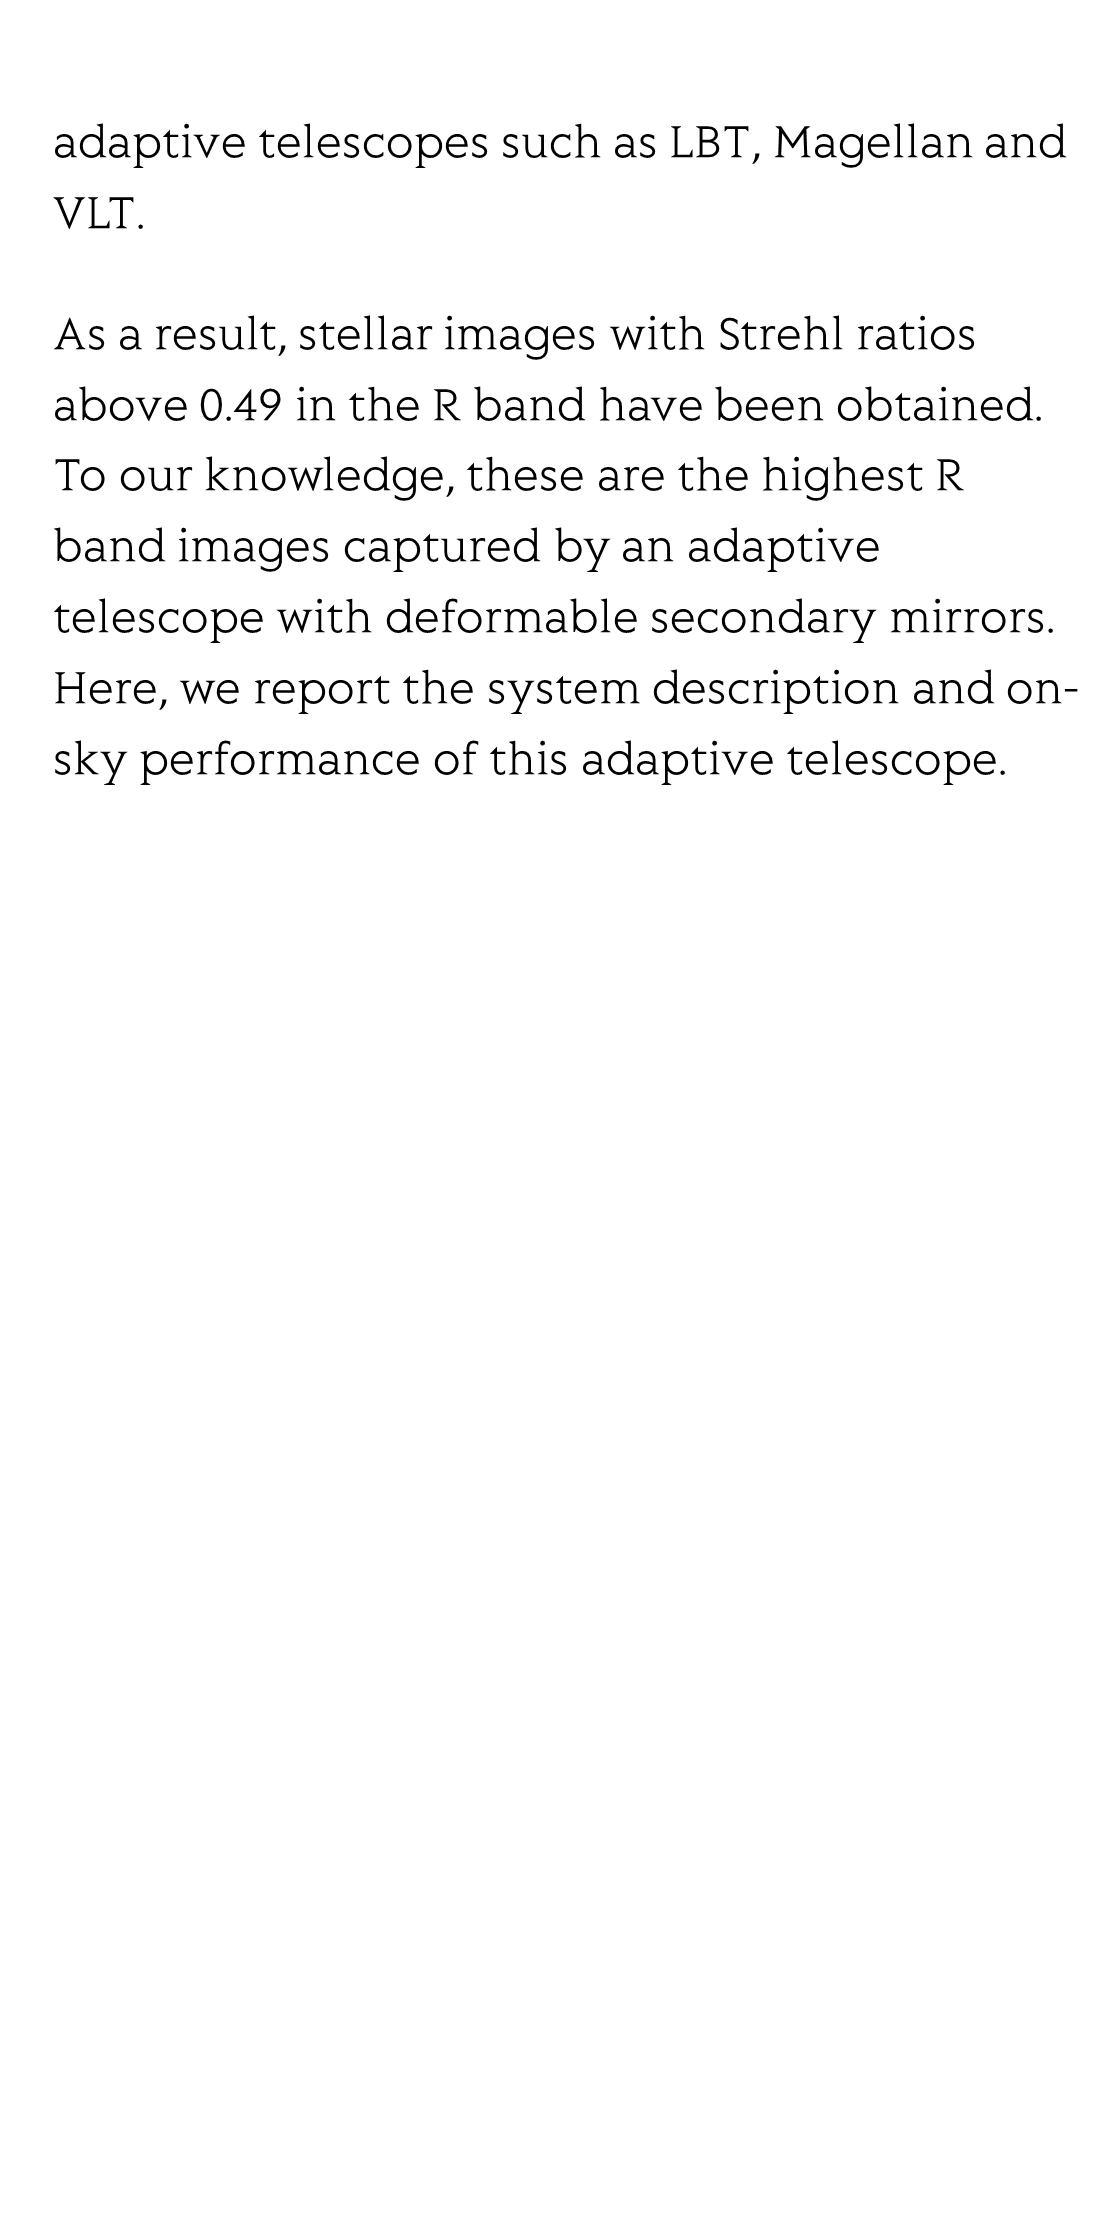 High-resolution visible imaging with piezoelectric deformable secondary mirror: experimental results at the 1.8-m adaptive telescope_3